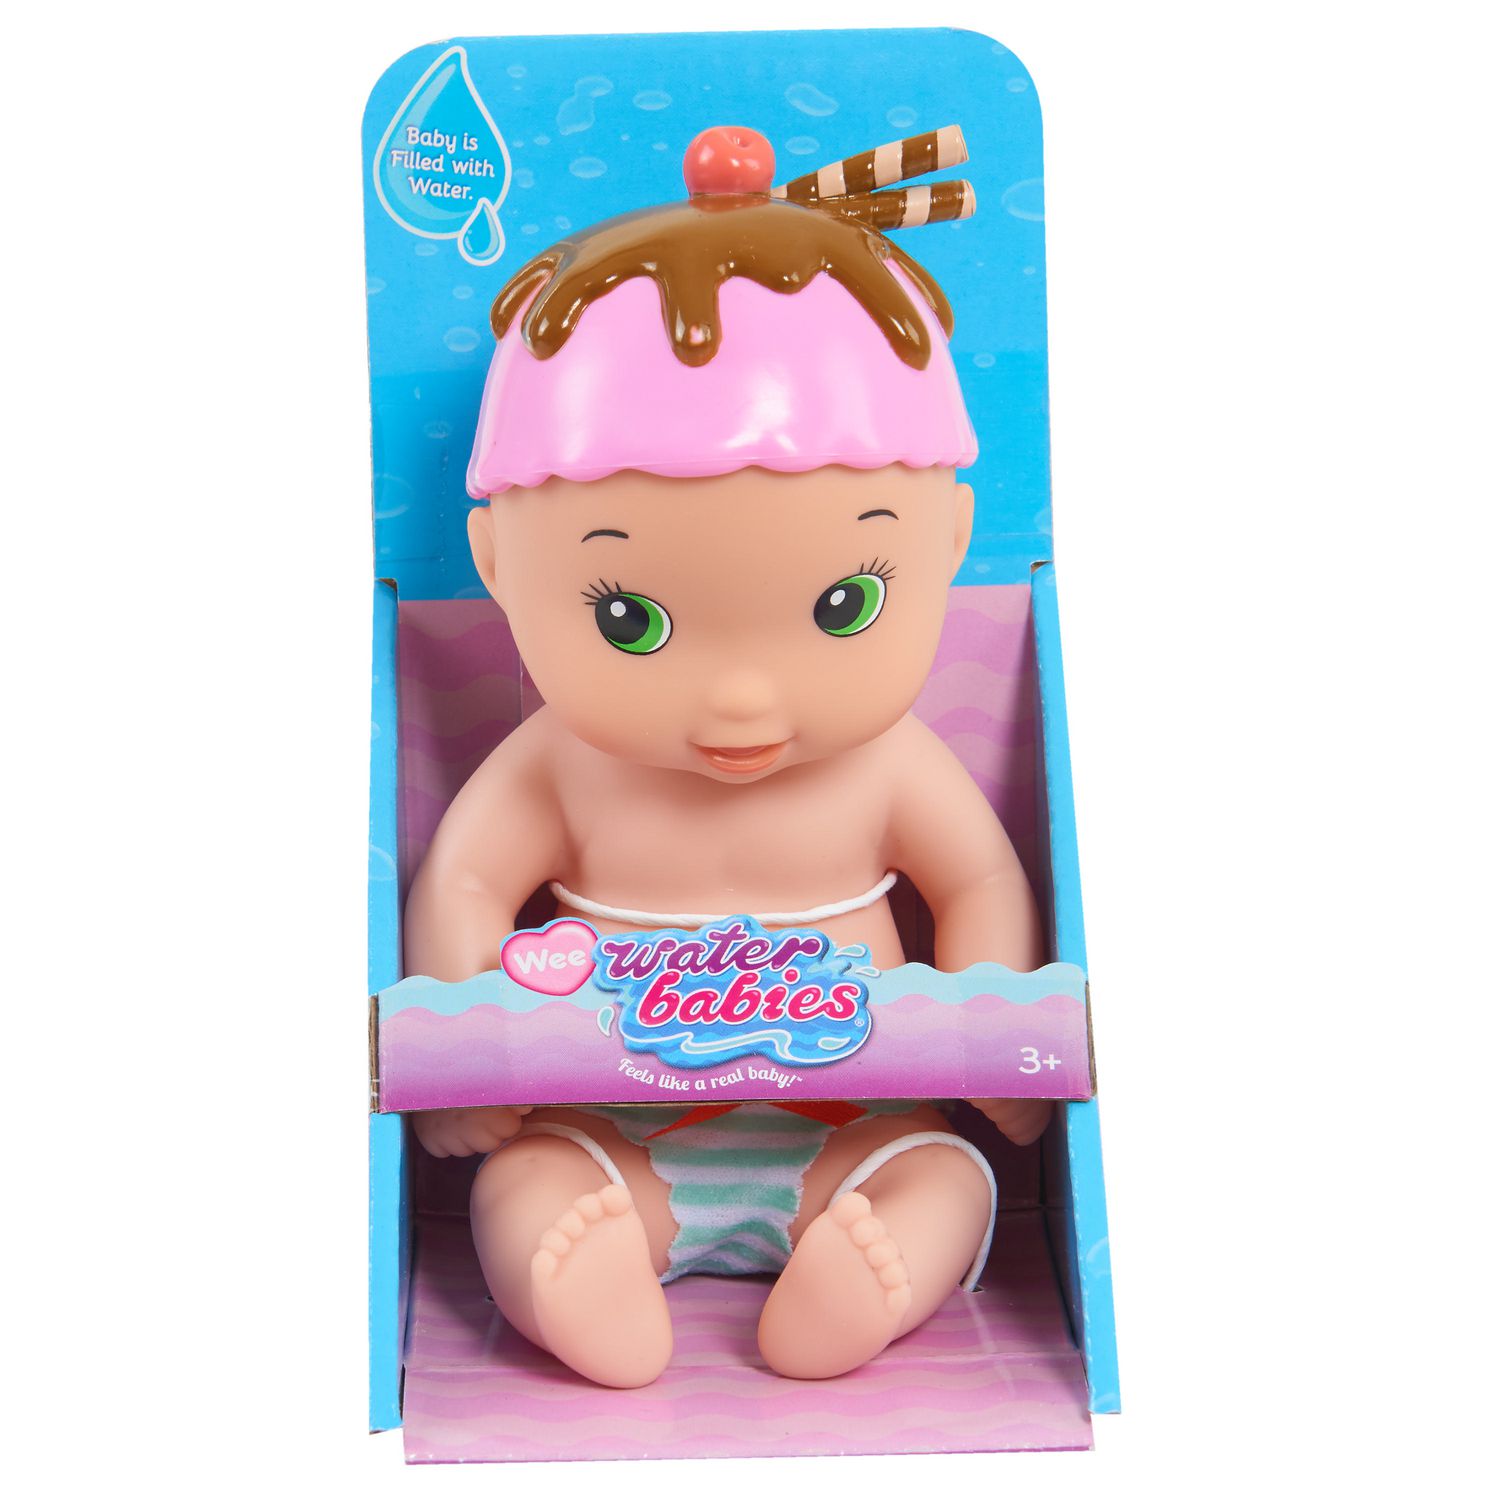 baby doll filled with water